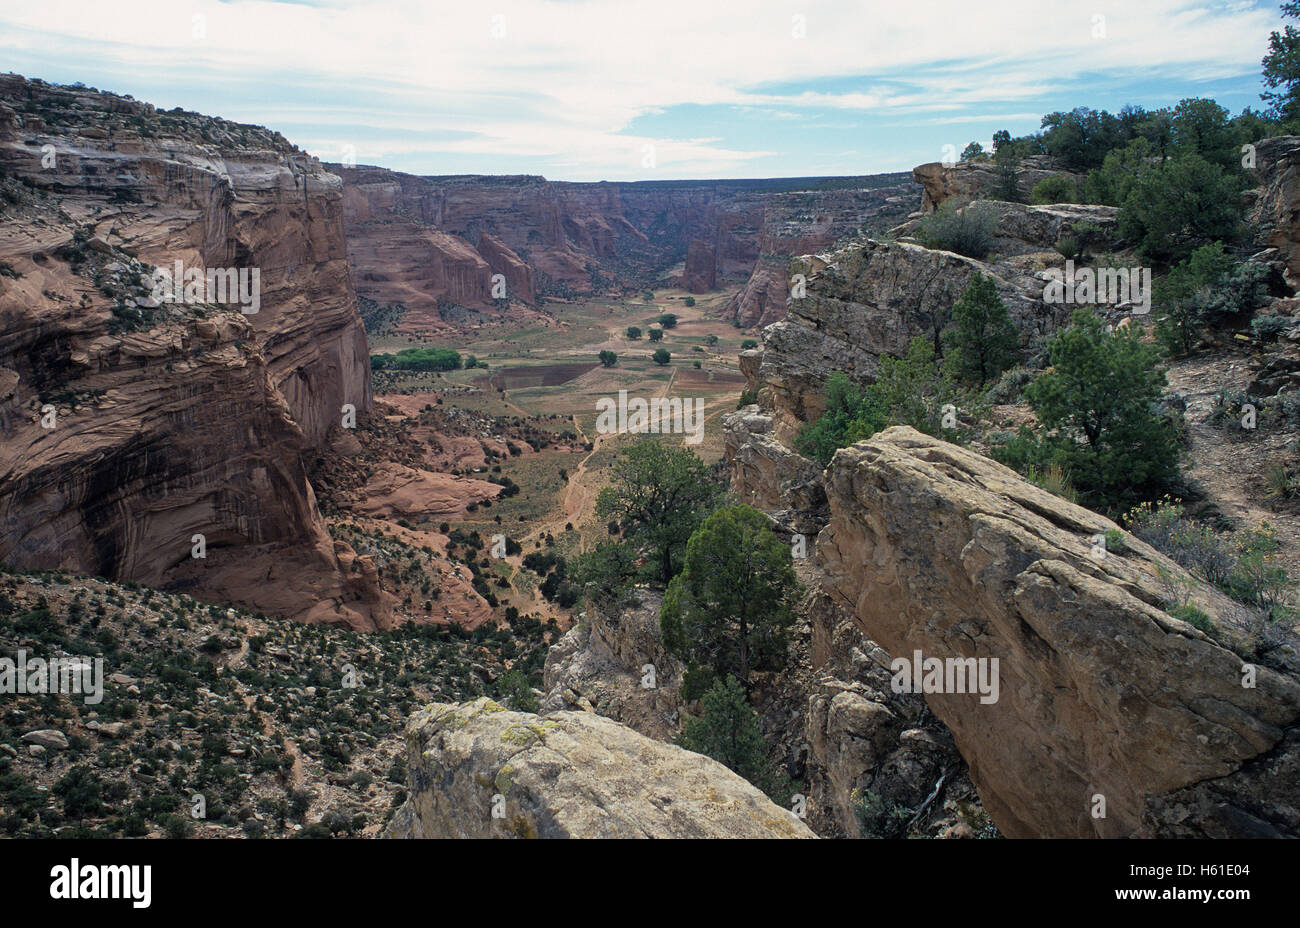 View of farmland and sandstone cliffs in Canyon de Chelly National Monument, Arizona Stock Photo